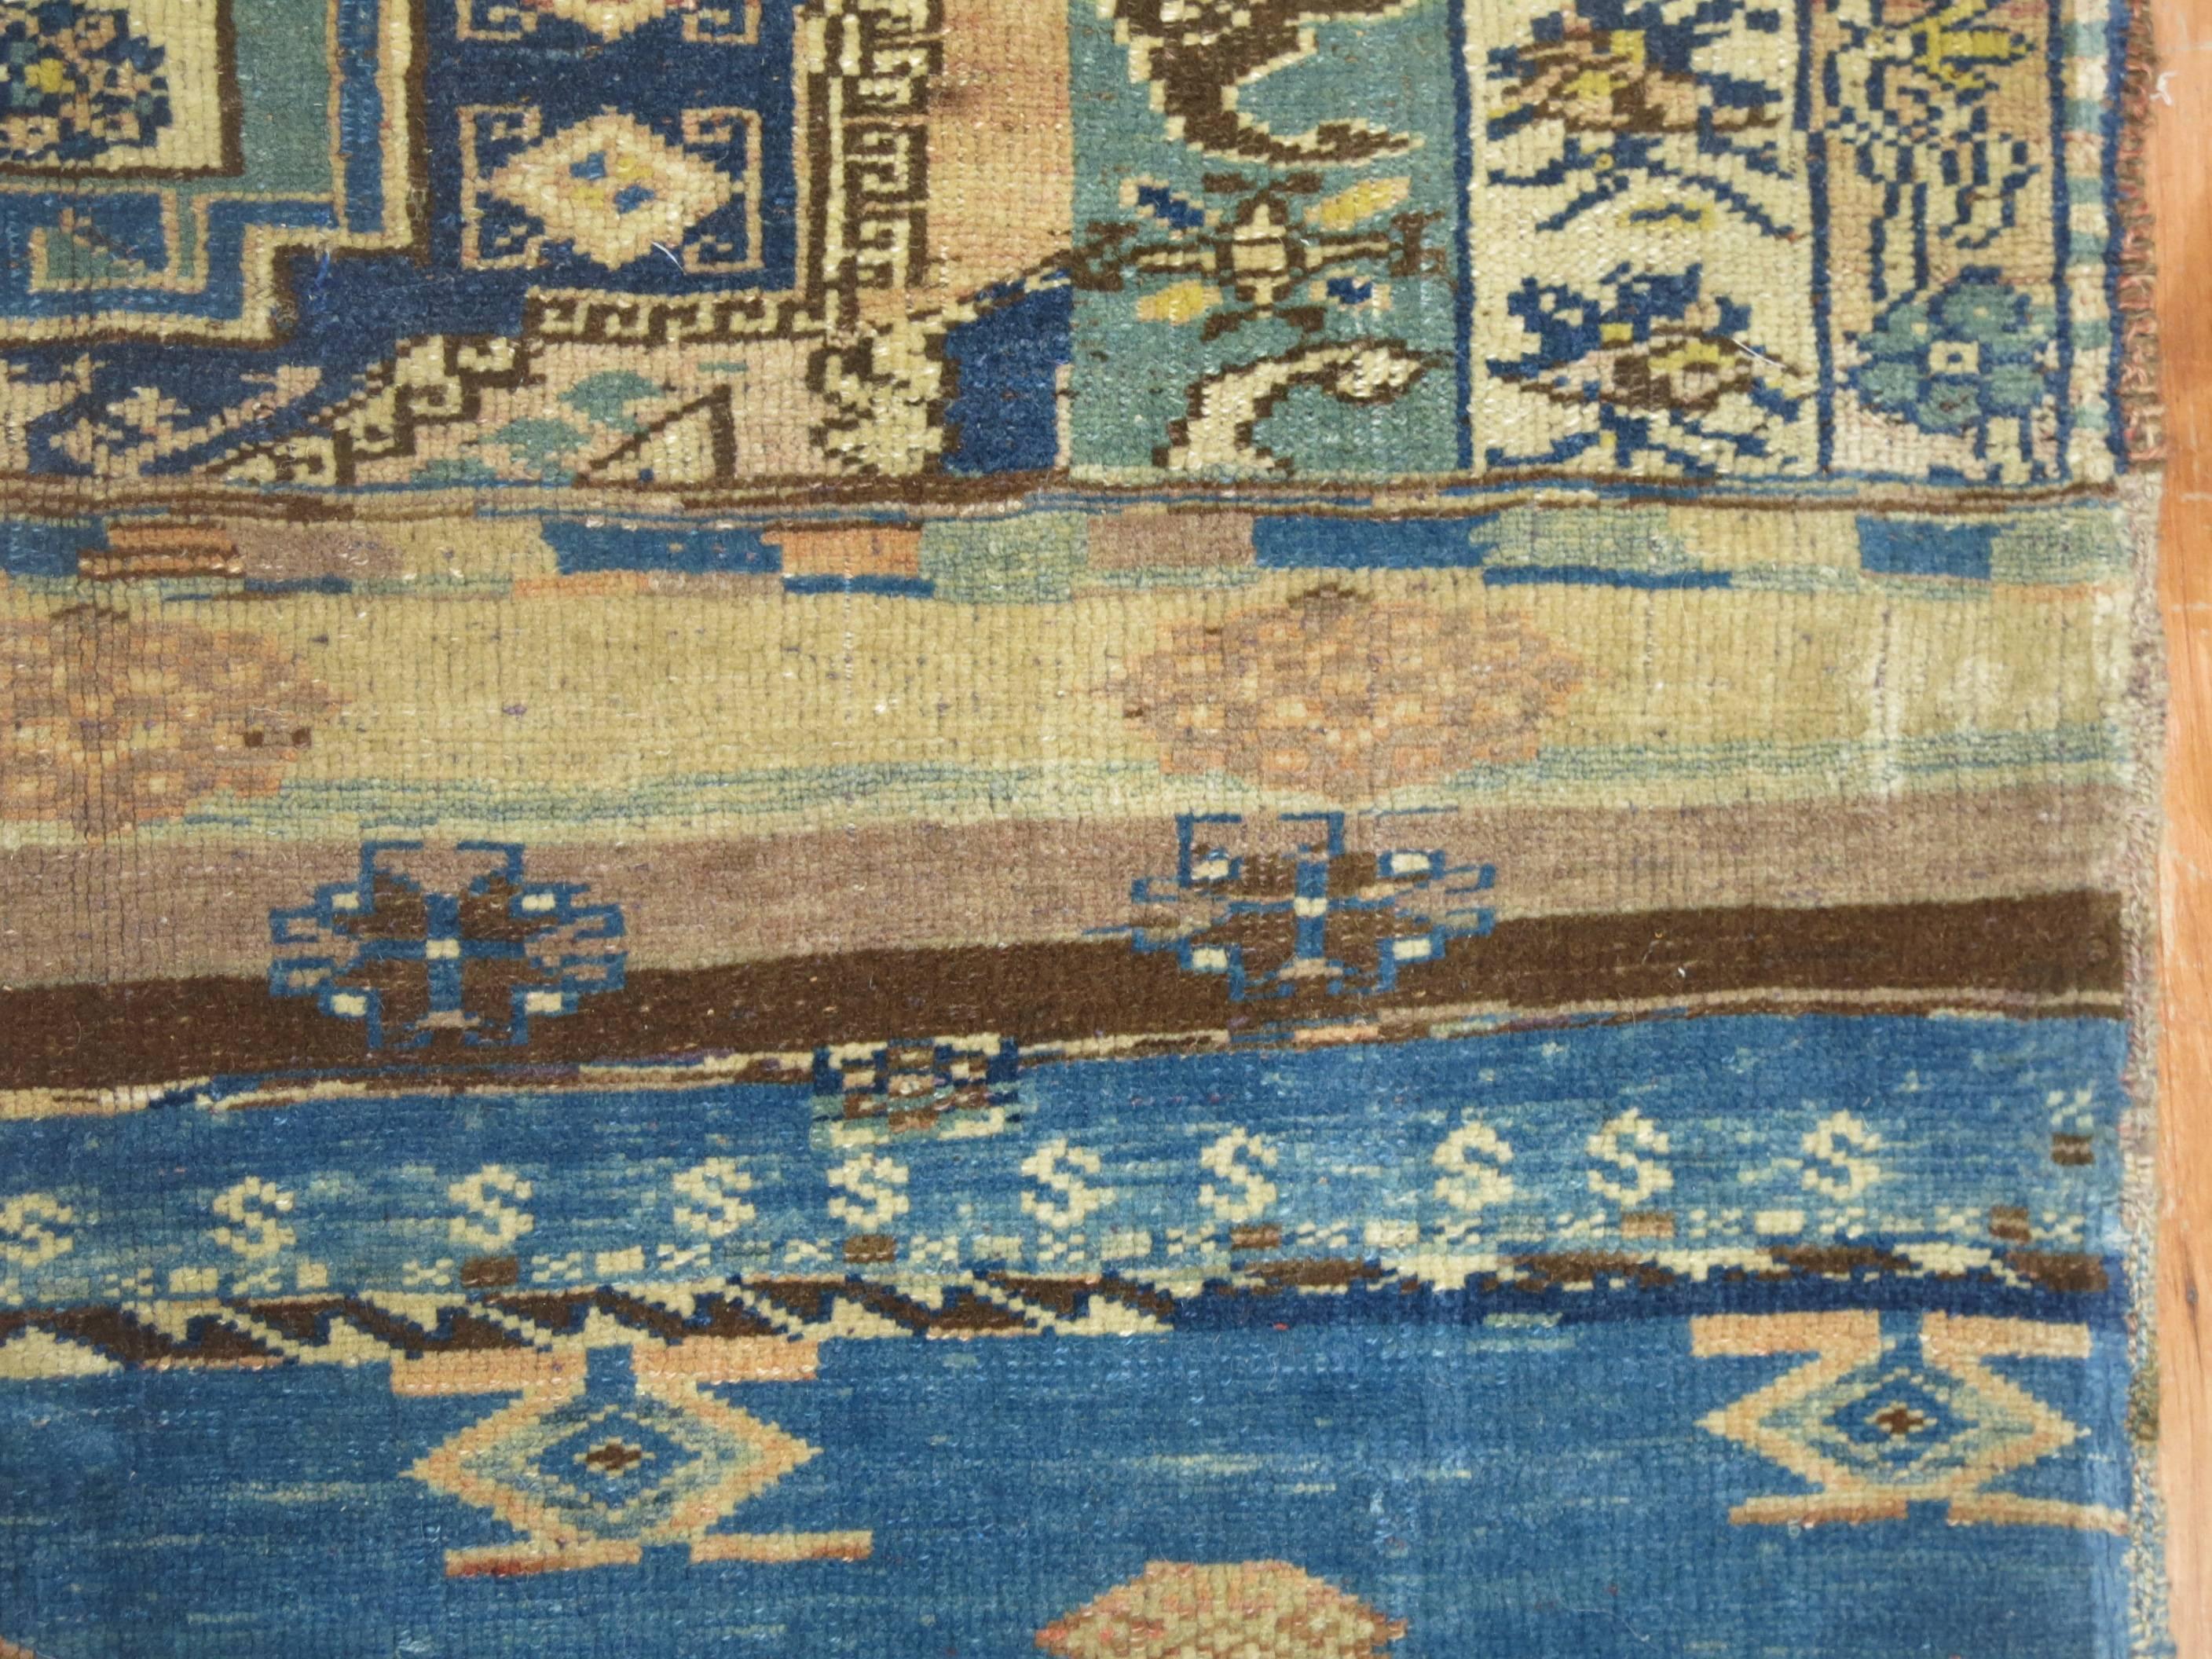 A vintage Turkish sampler rug in predominant camel, blue and greens. At first weavers constructed samplers, also known as Wagirehs, which acted as a blueprint for larger carpets. The finished weaving's were of fine quality and outstanding colors.